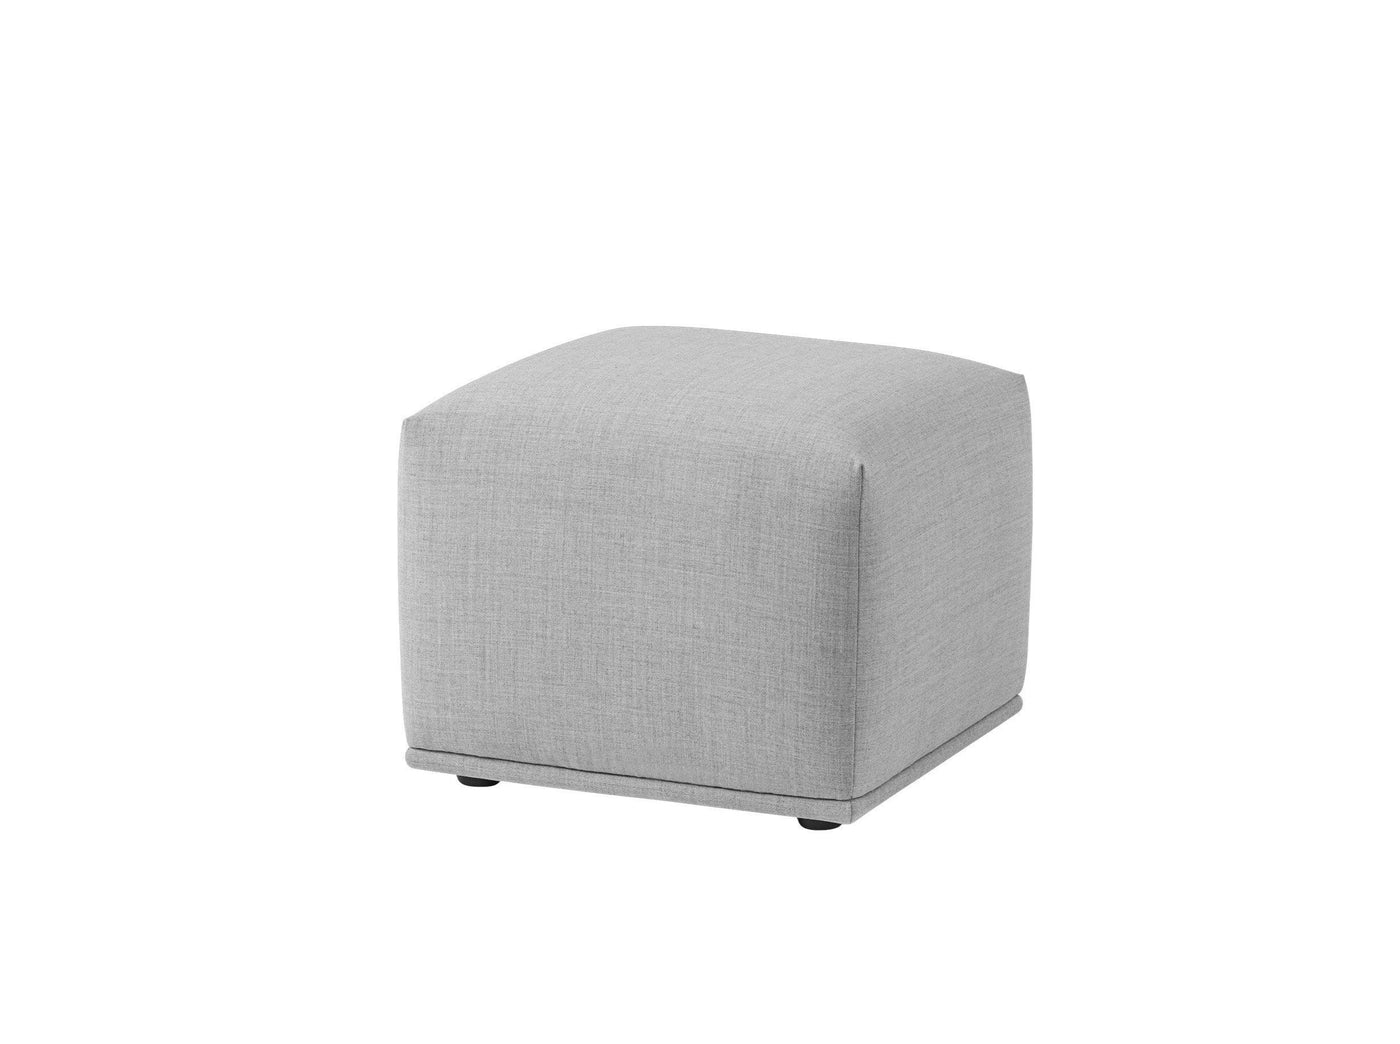 Muuto Echo Pouf W52 x D52cm in Remix 123 light grey Kvadrat fabric. made to order from someday designs. #colour_remix-123